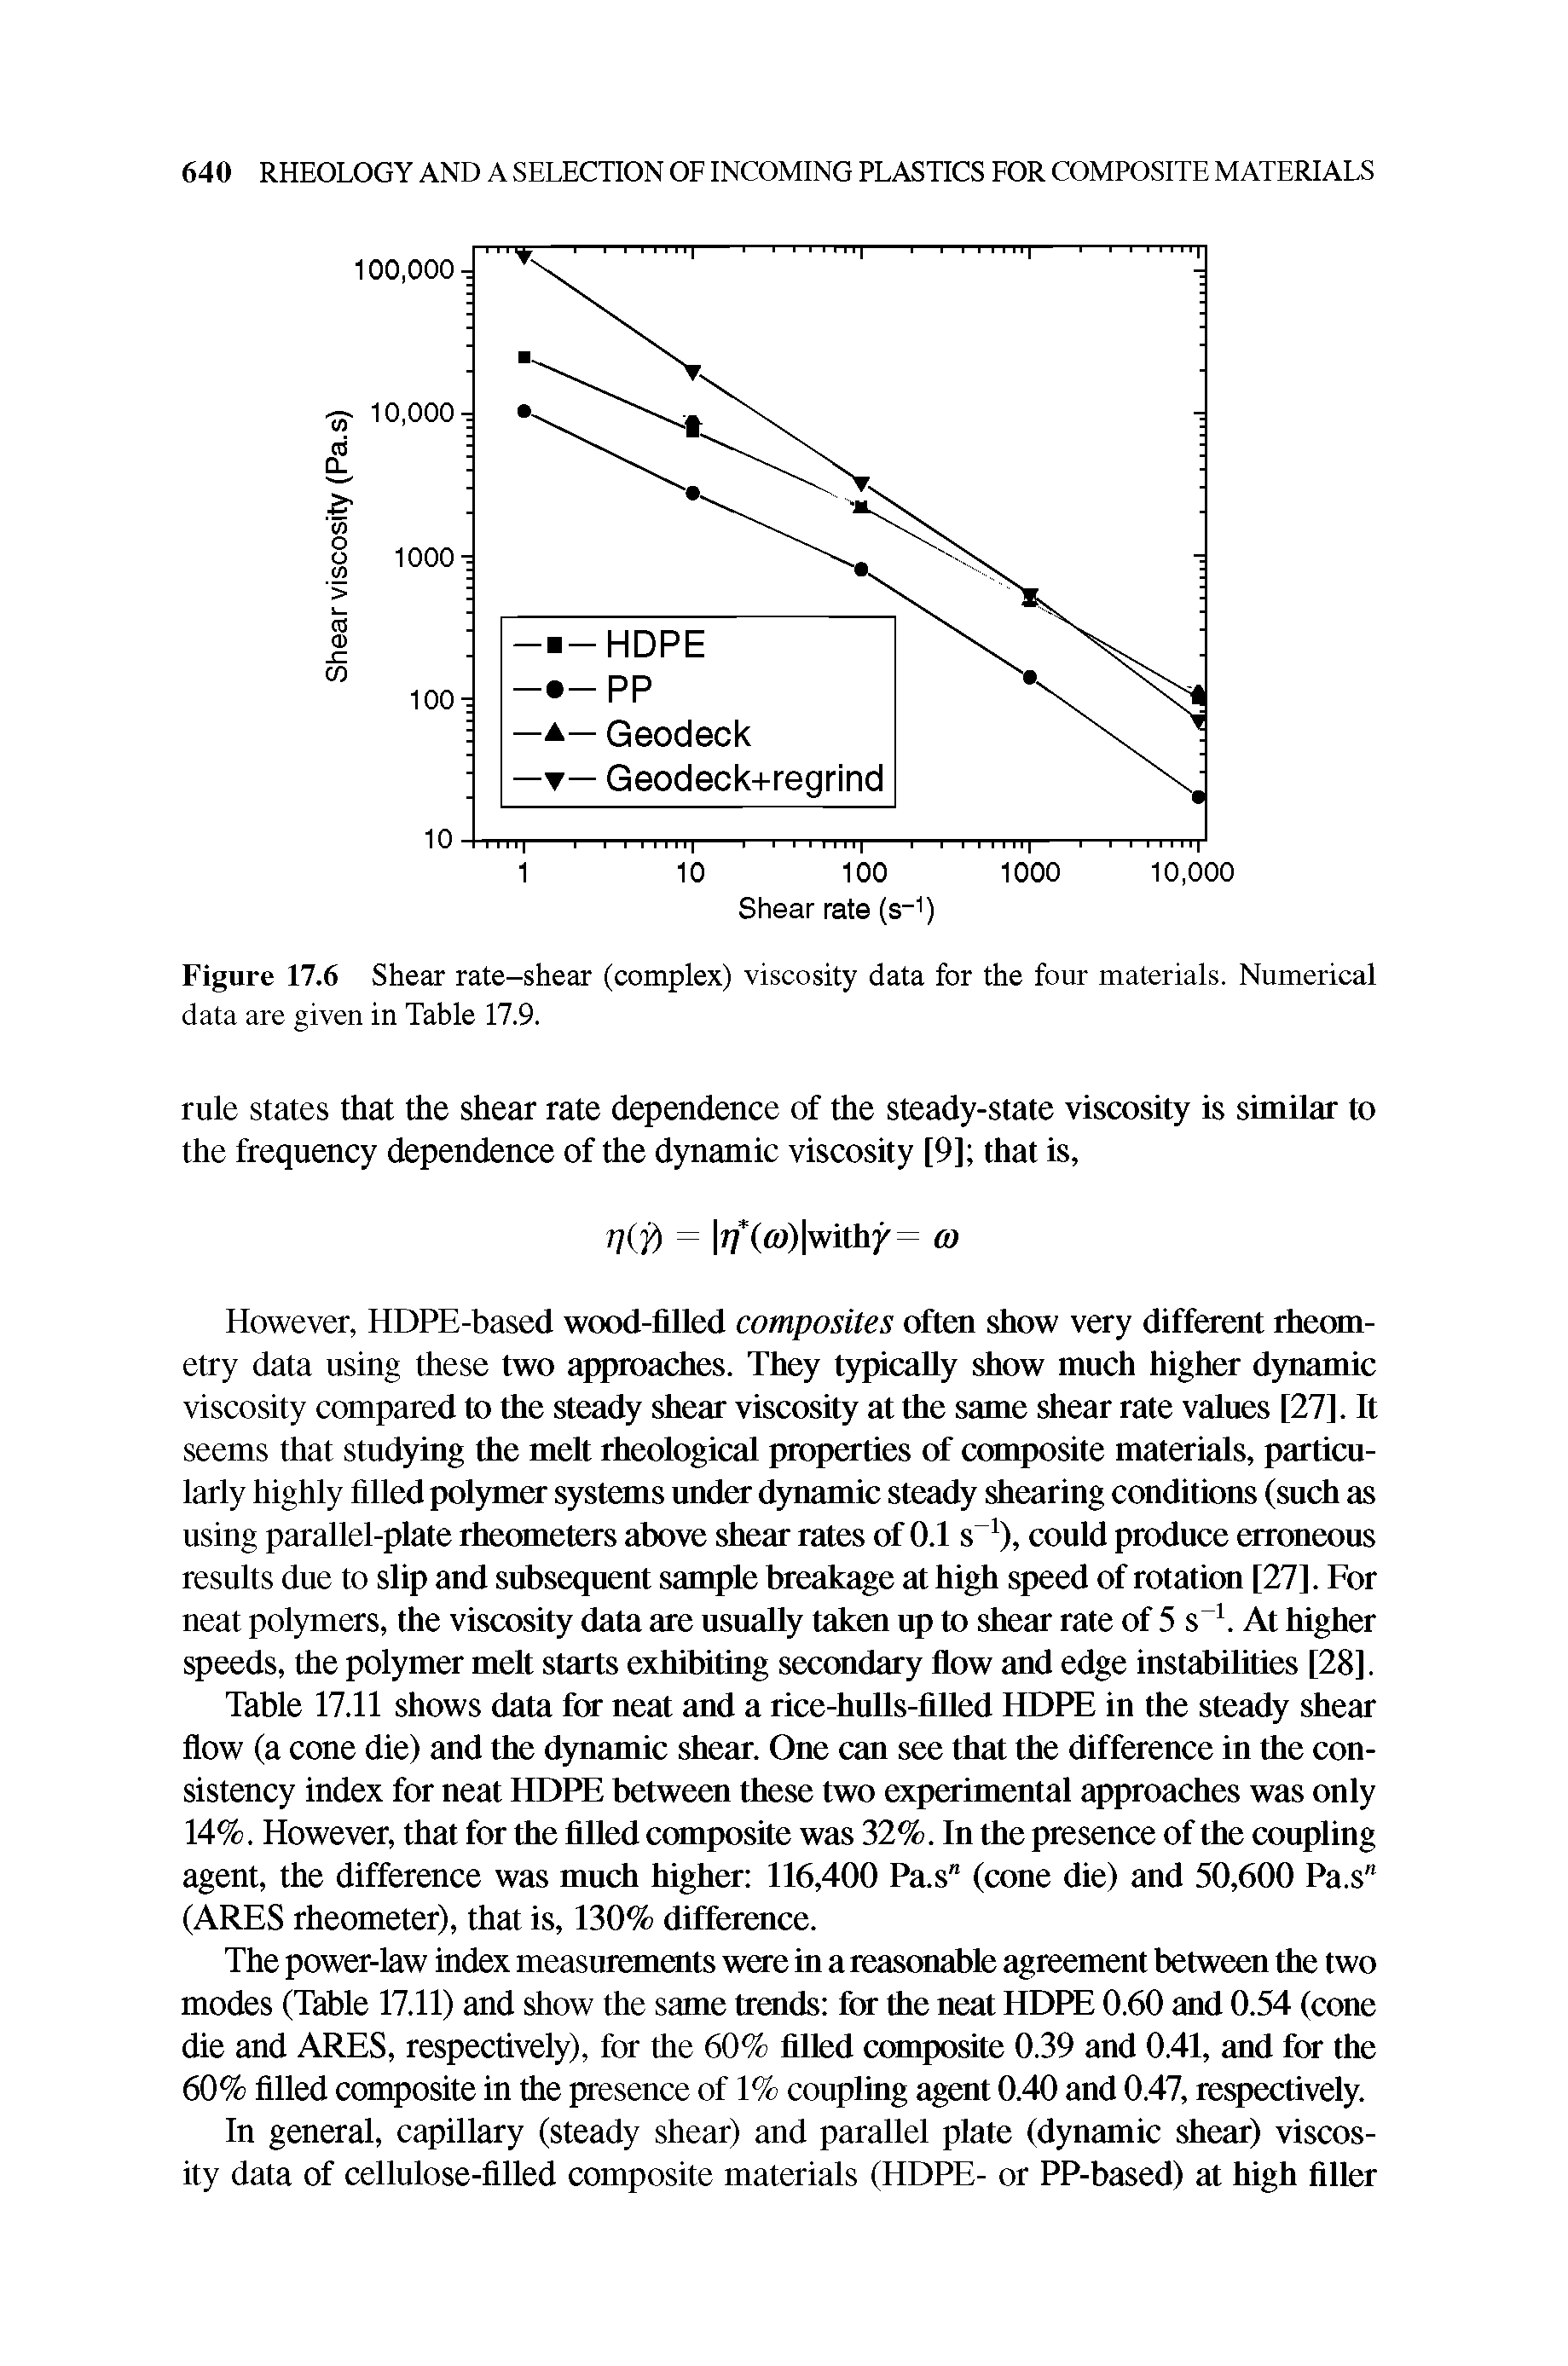 Figure 17.6 Shear rate-shear (complex) viscosity data for the four materials. Numerical data are given in Table 17.9.